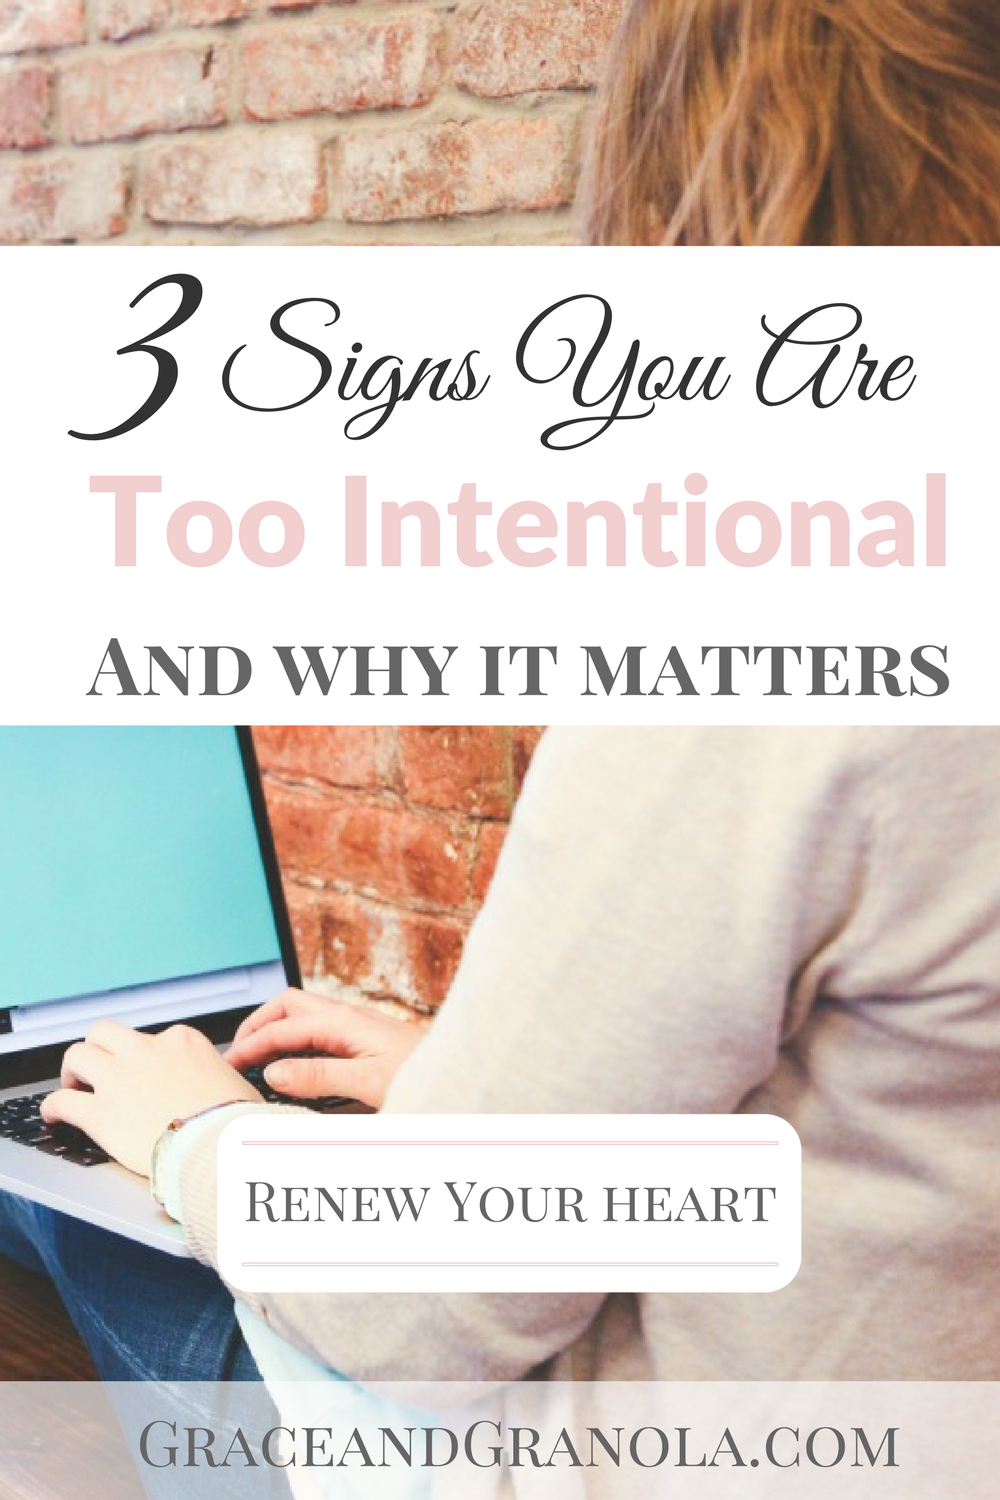 3 Signs You Are Too Intentional